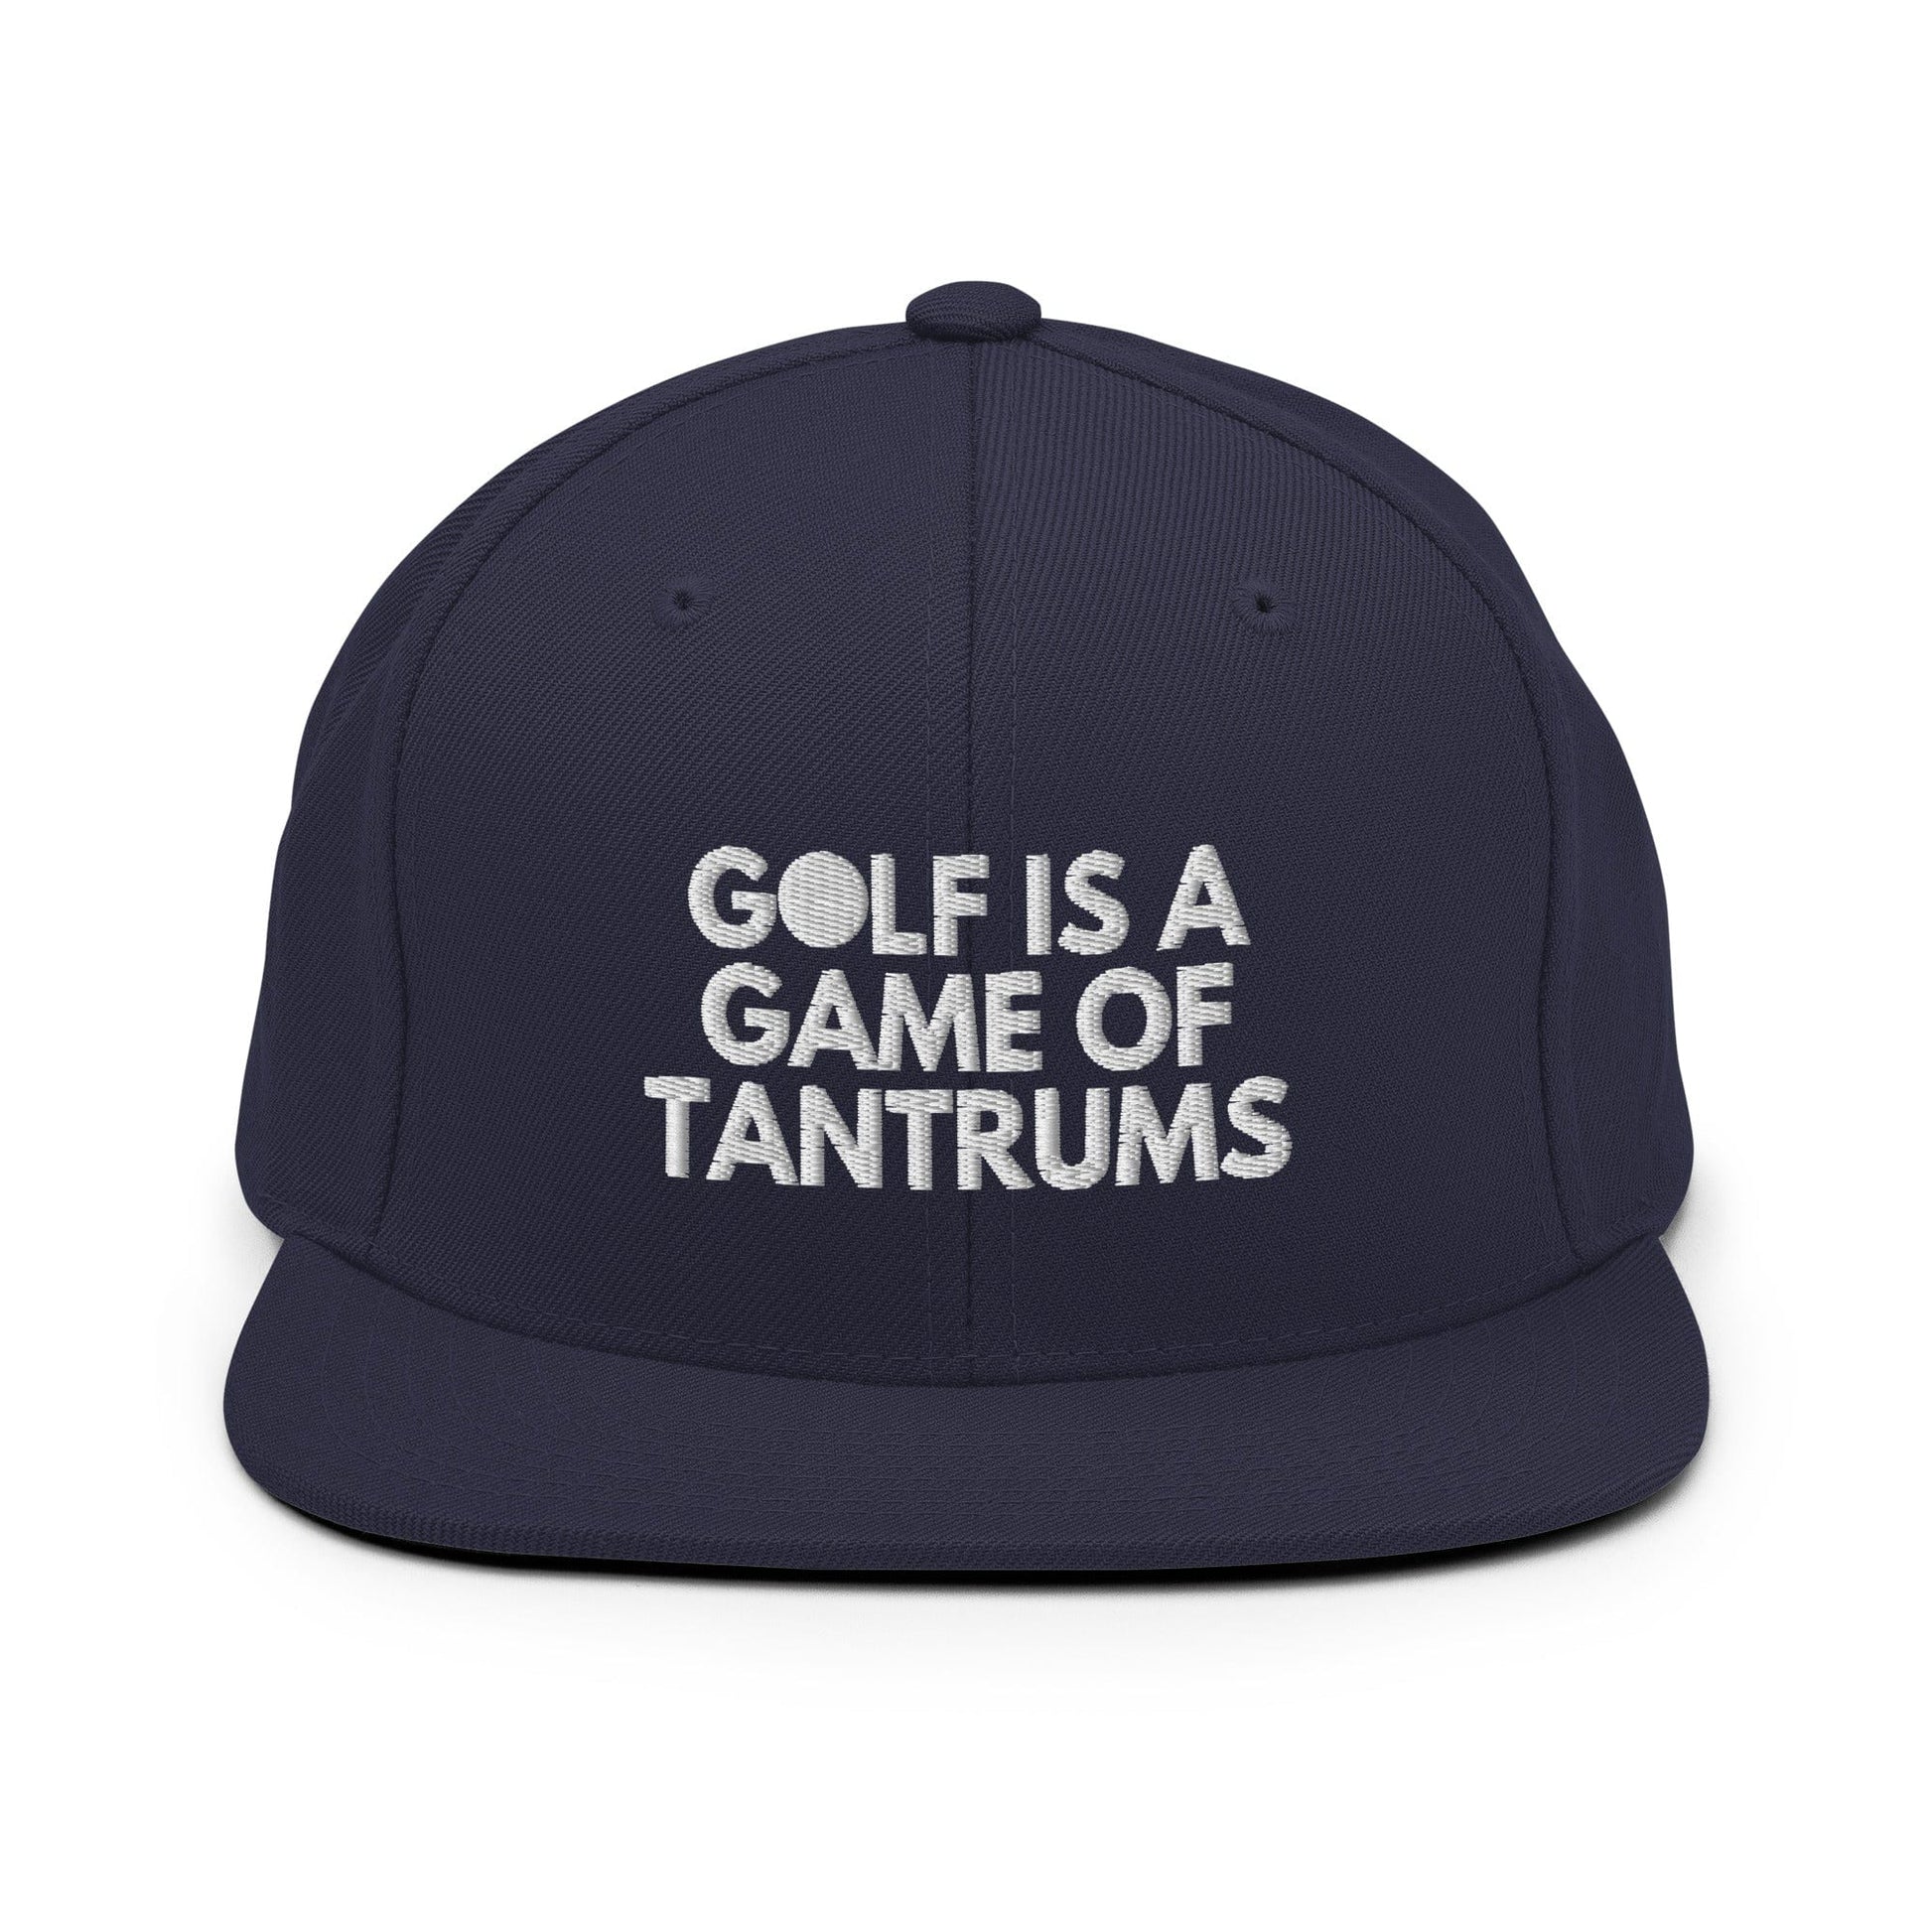 Funny Golfer Gifts  Snapback Hat Navy Golf Is A Game Of Tantrums Hat Snapback Hat